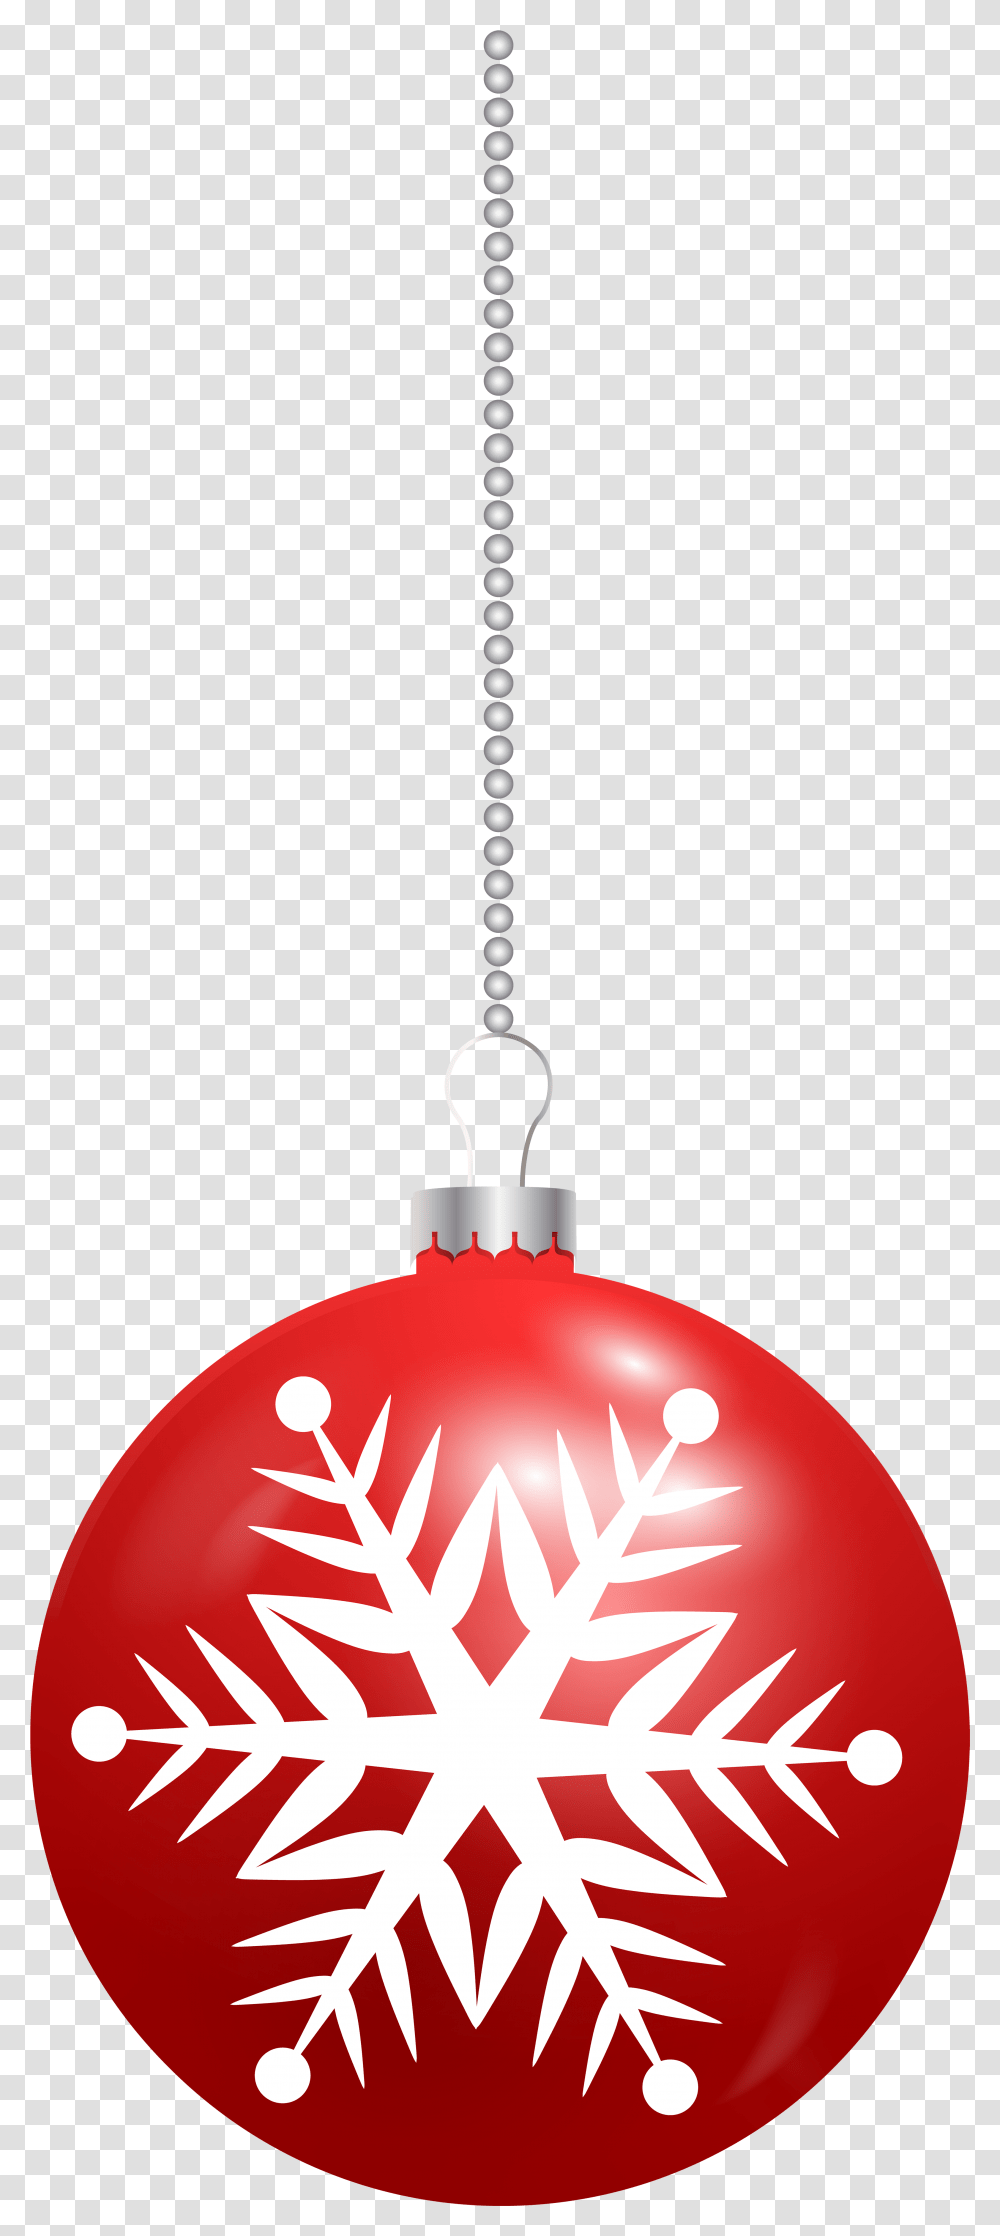 Red Snowflake Files Christmas Ball Ornament Clip Art Red, Plant Transparent Png